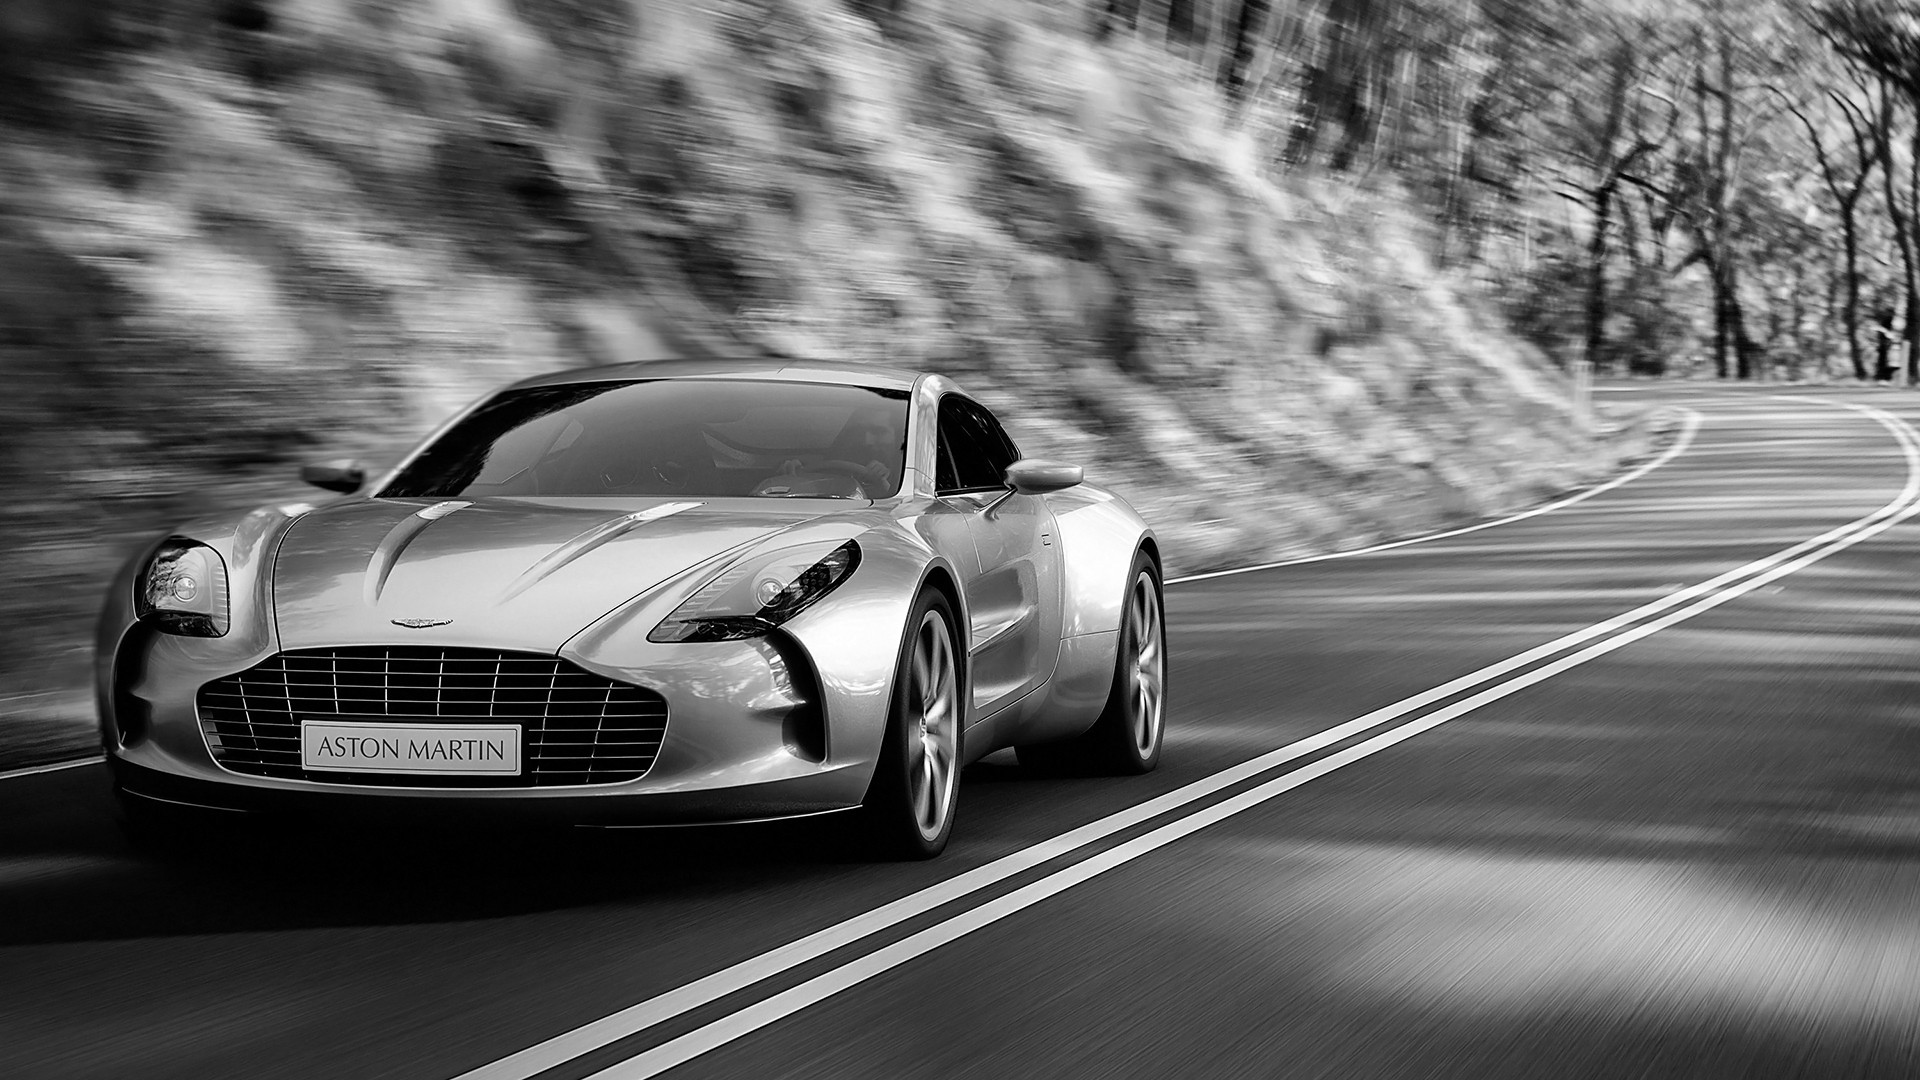 Aston Martin One 77 Silver Cars Road Vehicle Aston Martin One 77 Aston Martin One 77 Monochrome Car 1920x1080